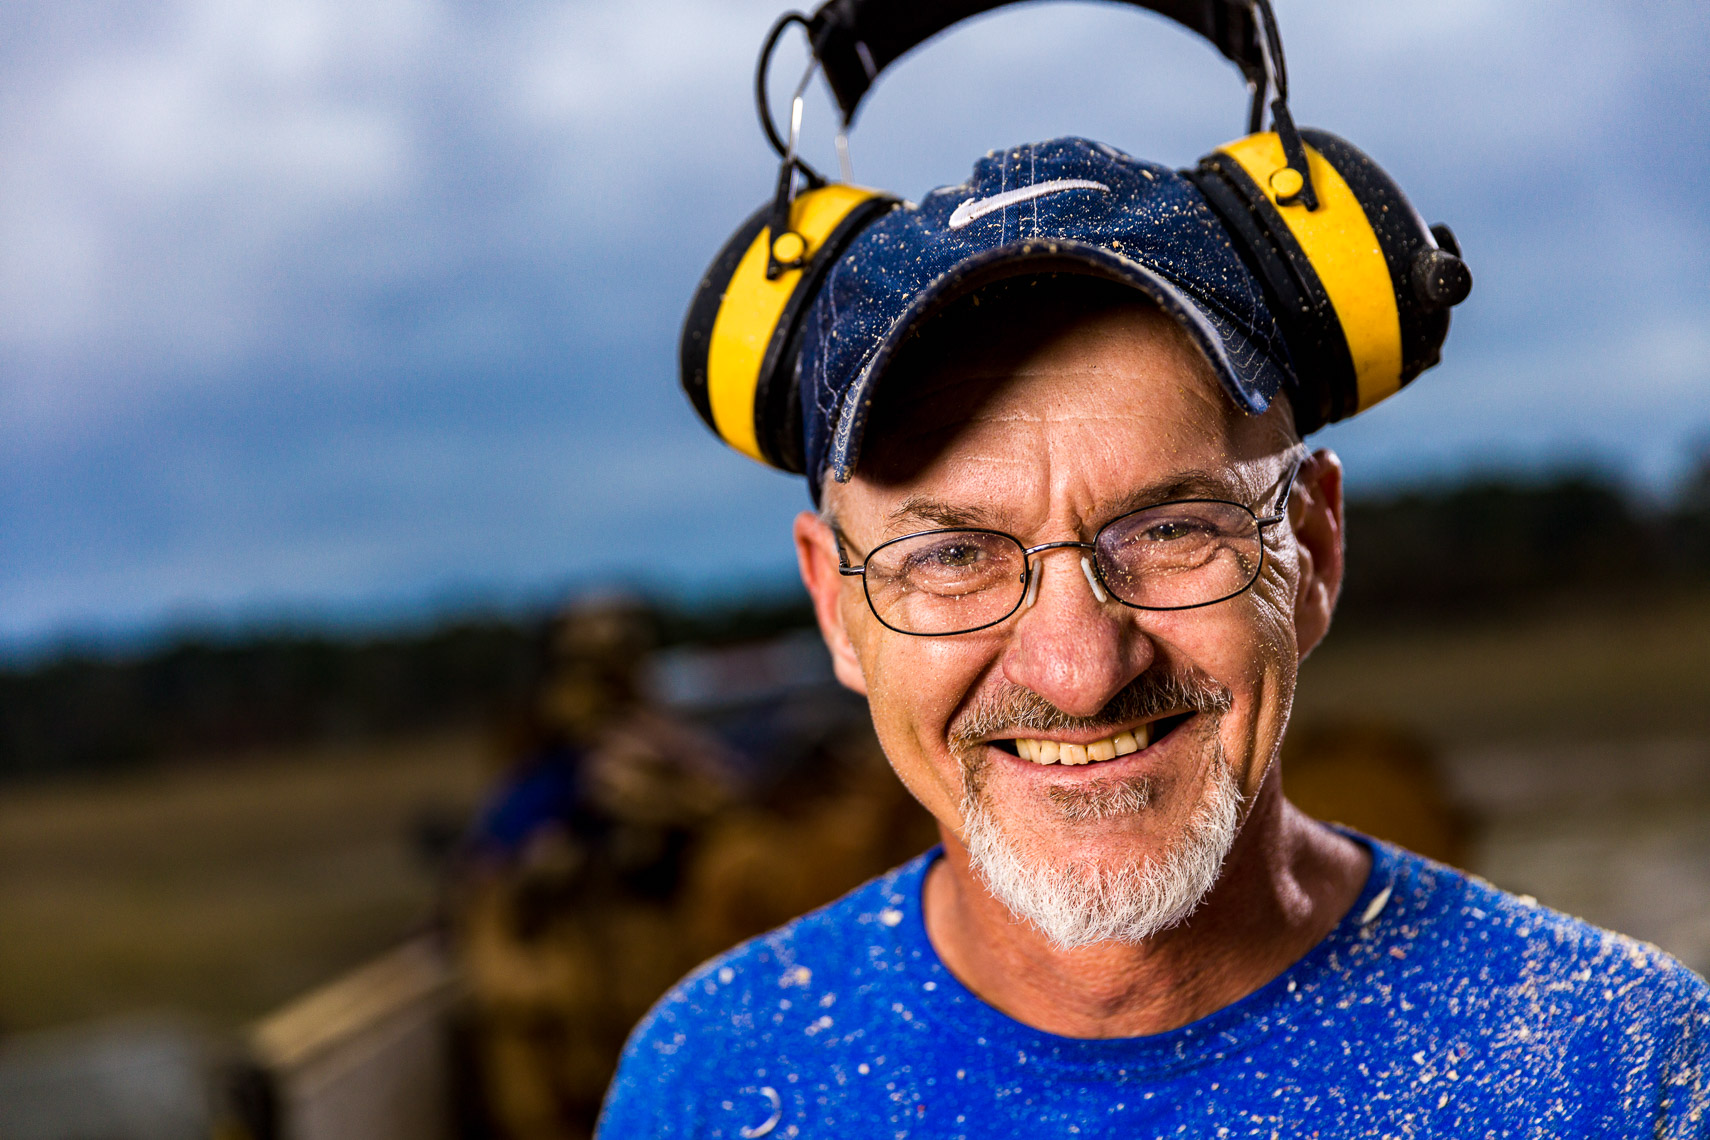 Portrait of a chainsaw carving artist